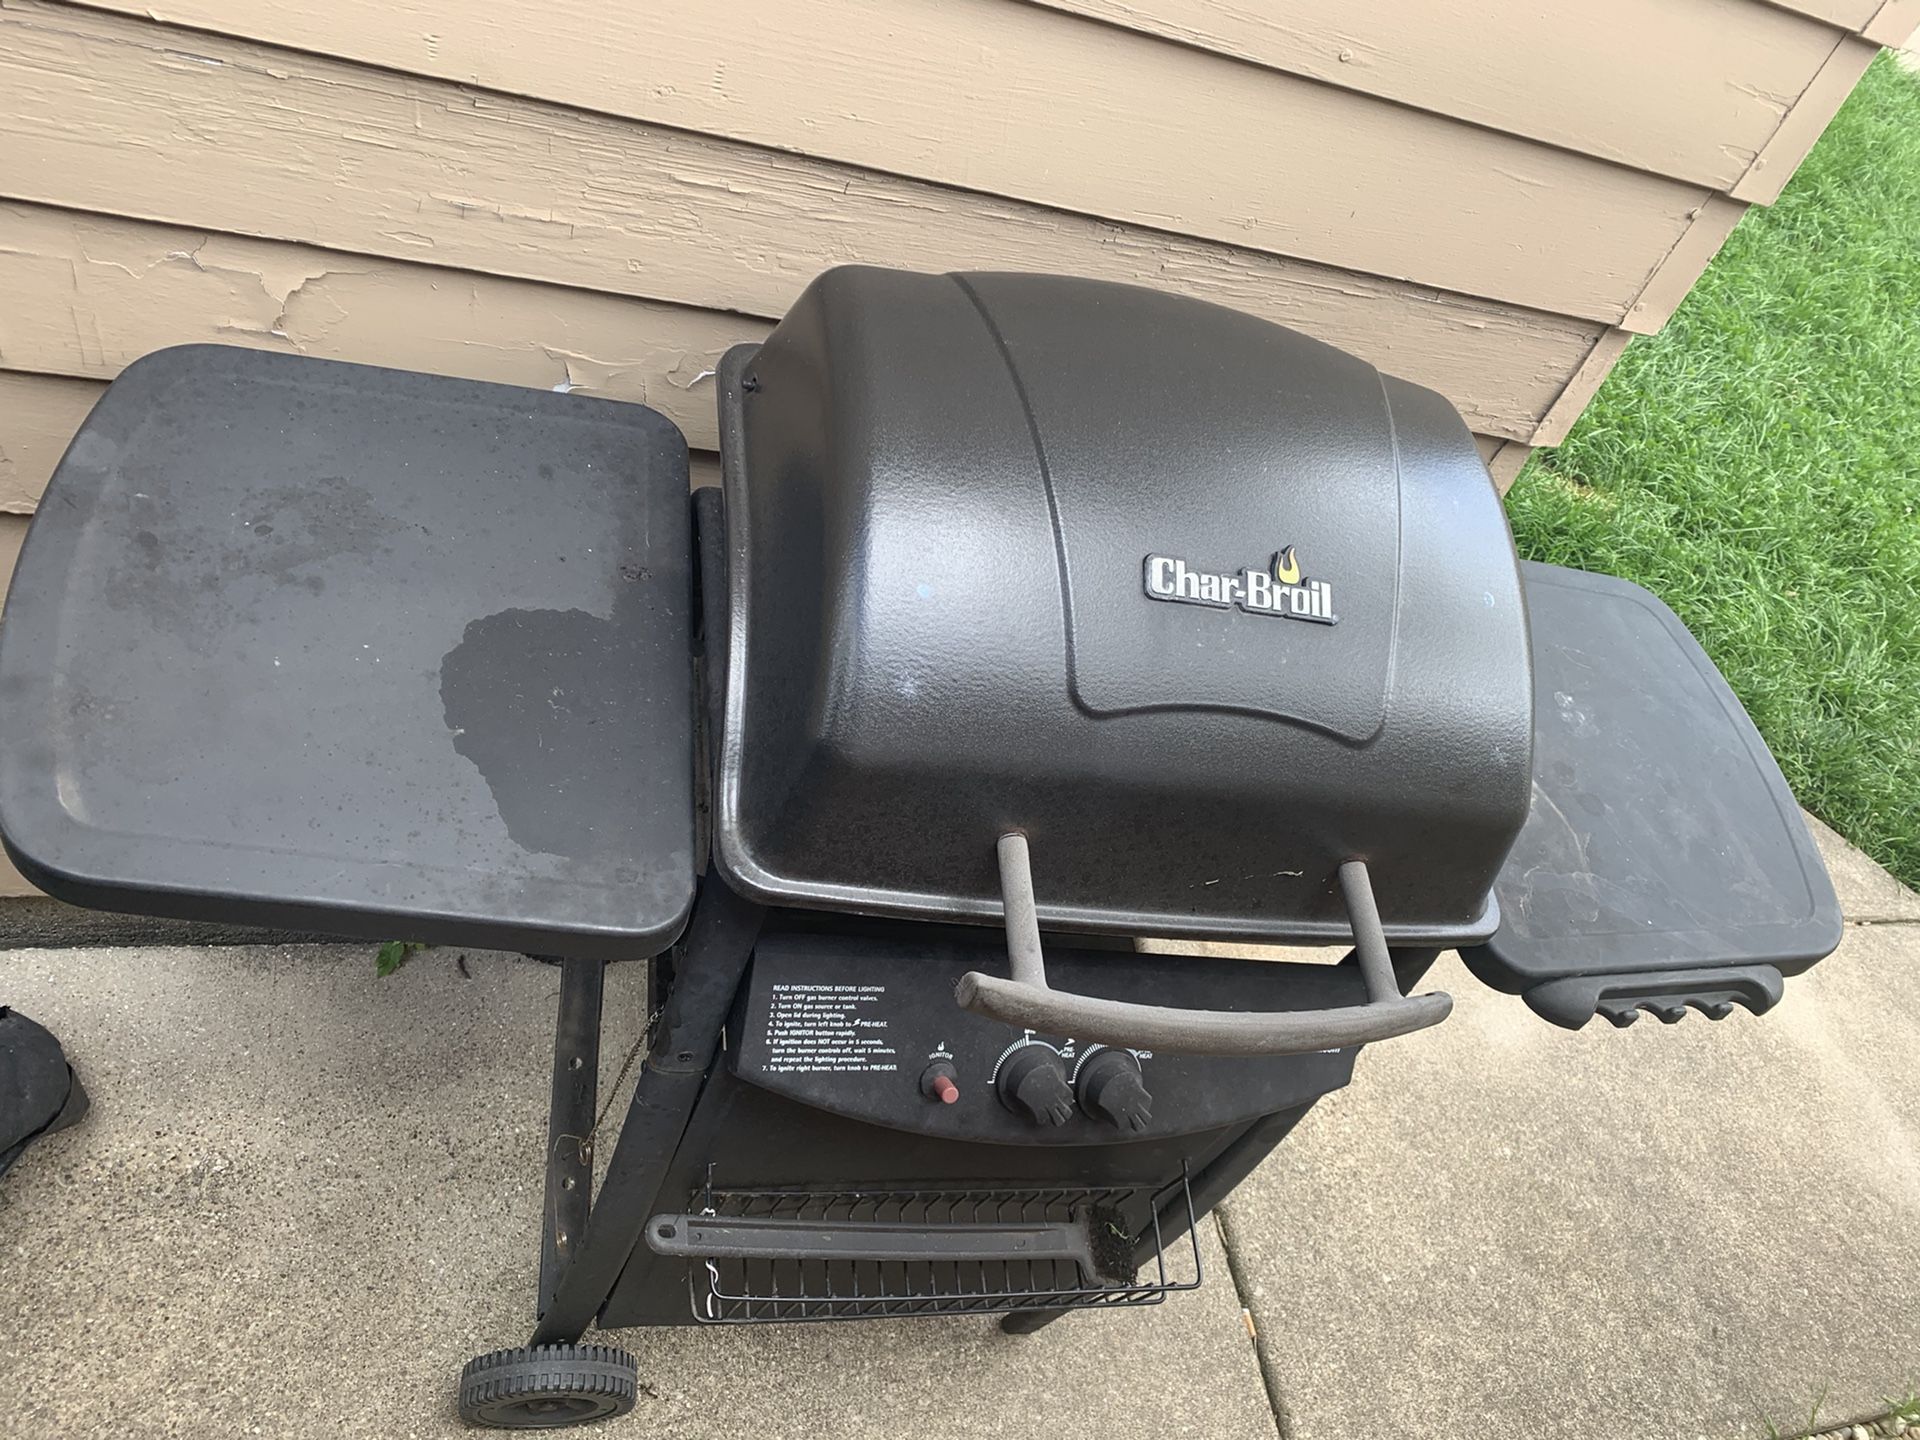 Grill - Char-Broil (used)